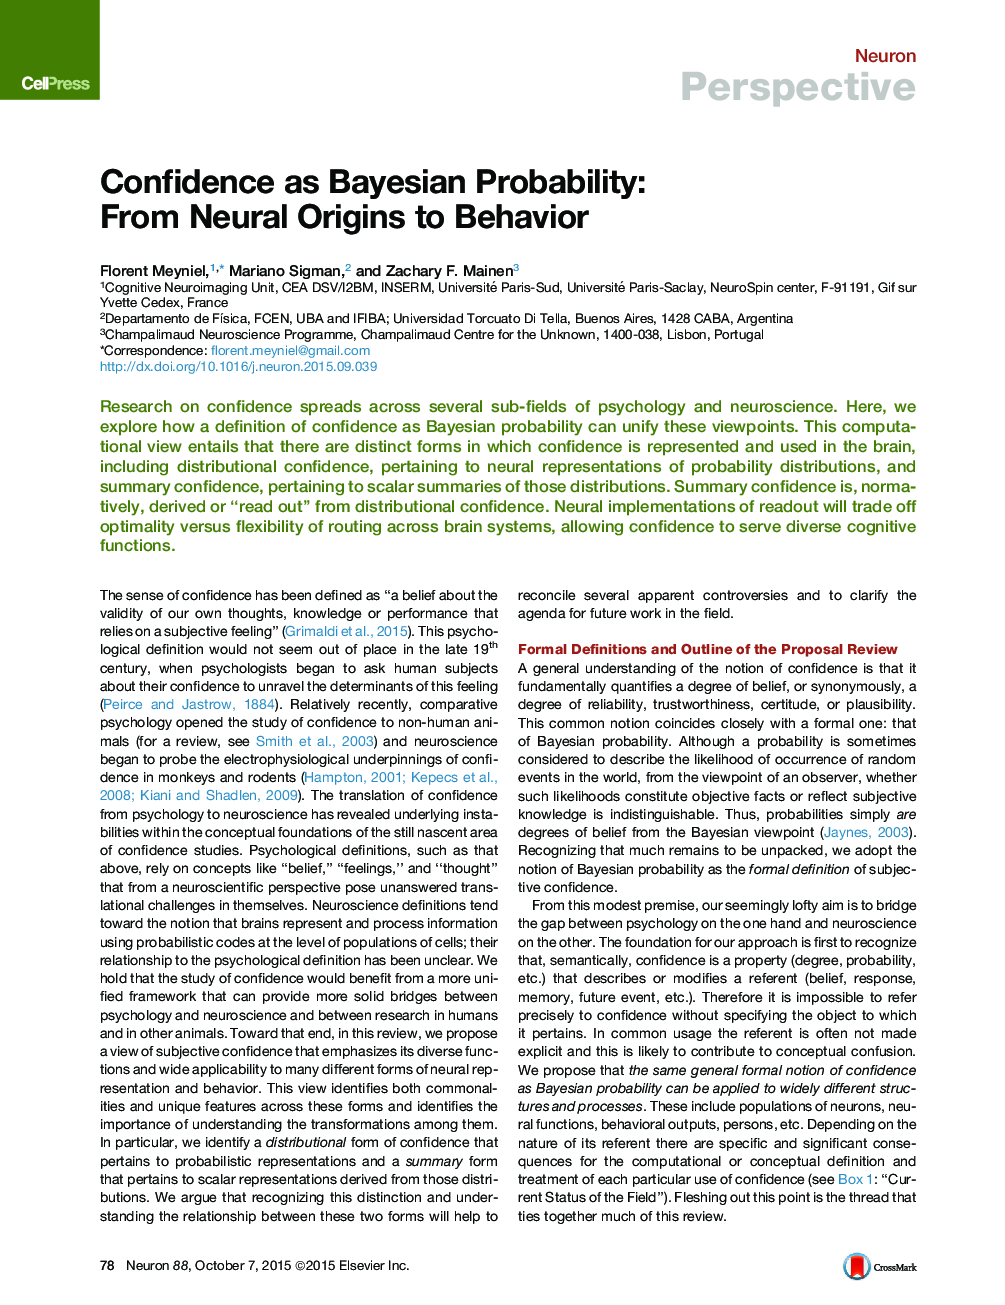 Confidence as Bayesian Probability: From Neural Origins to Behavior